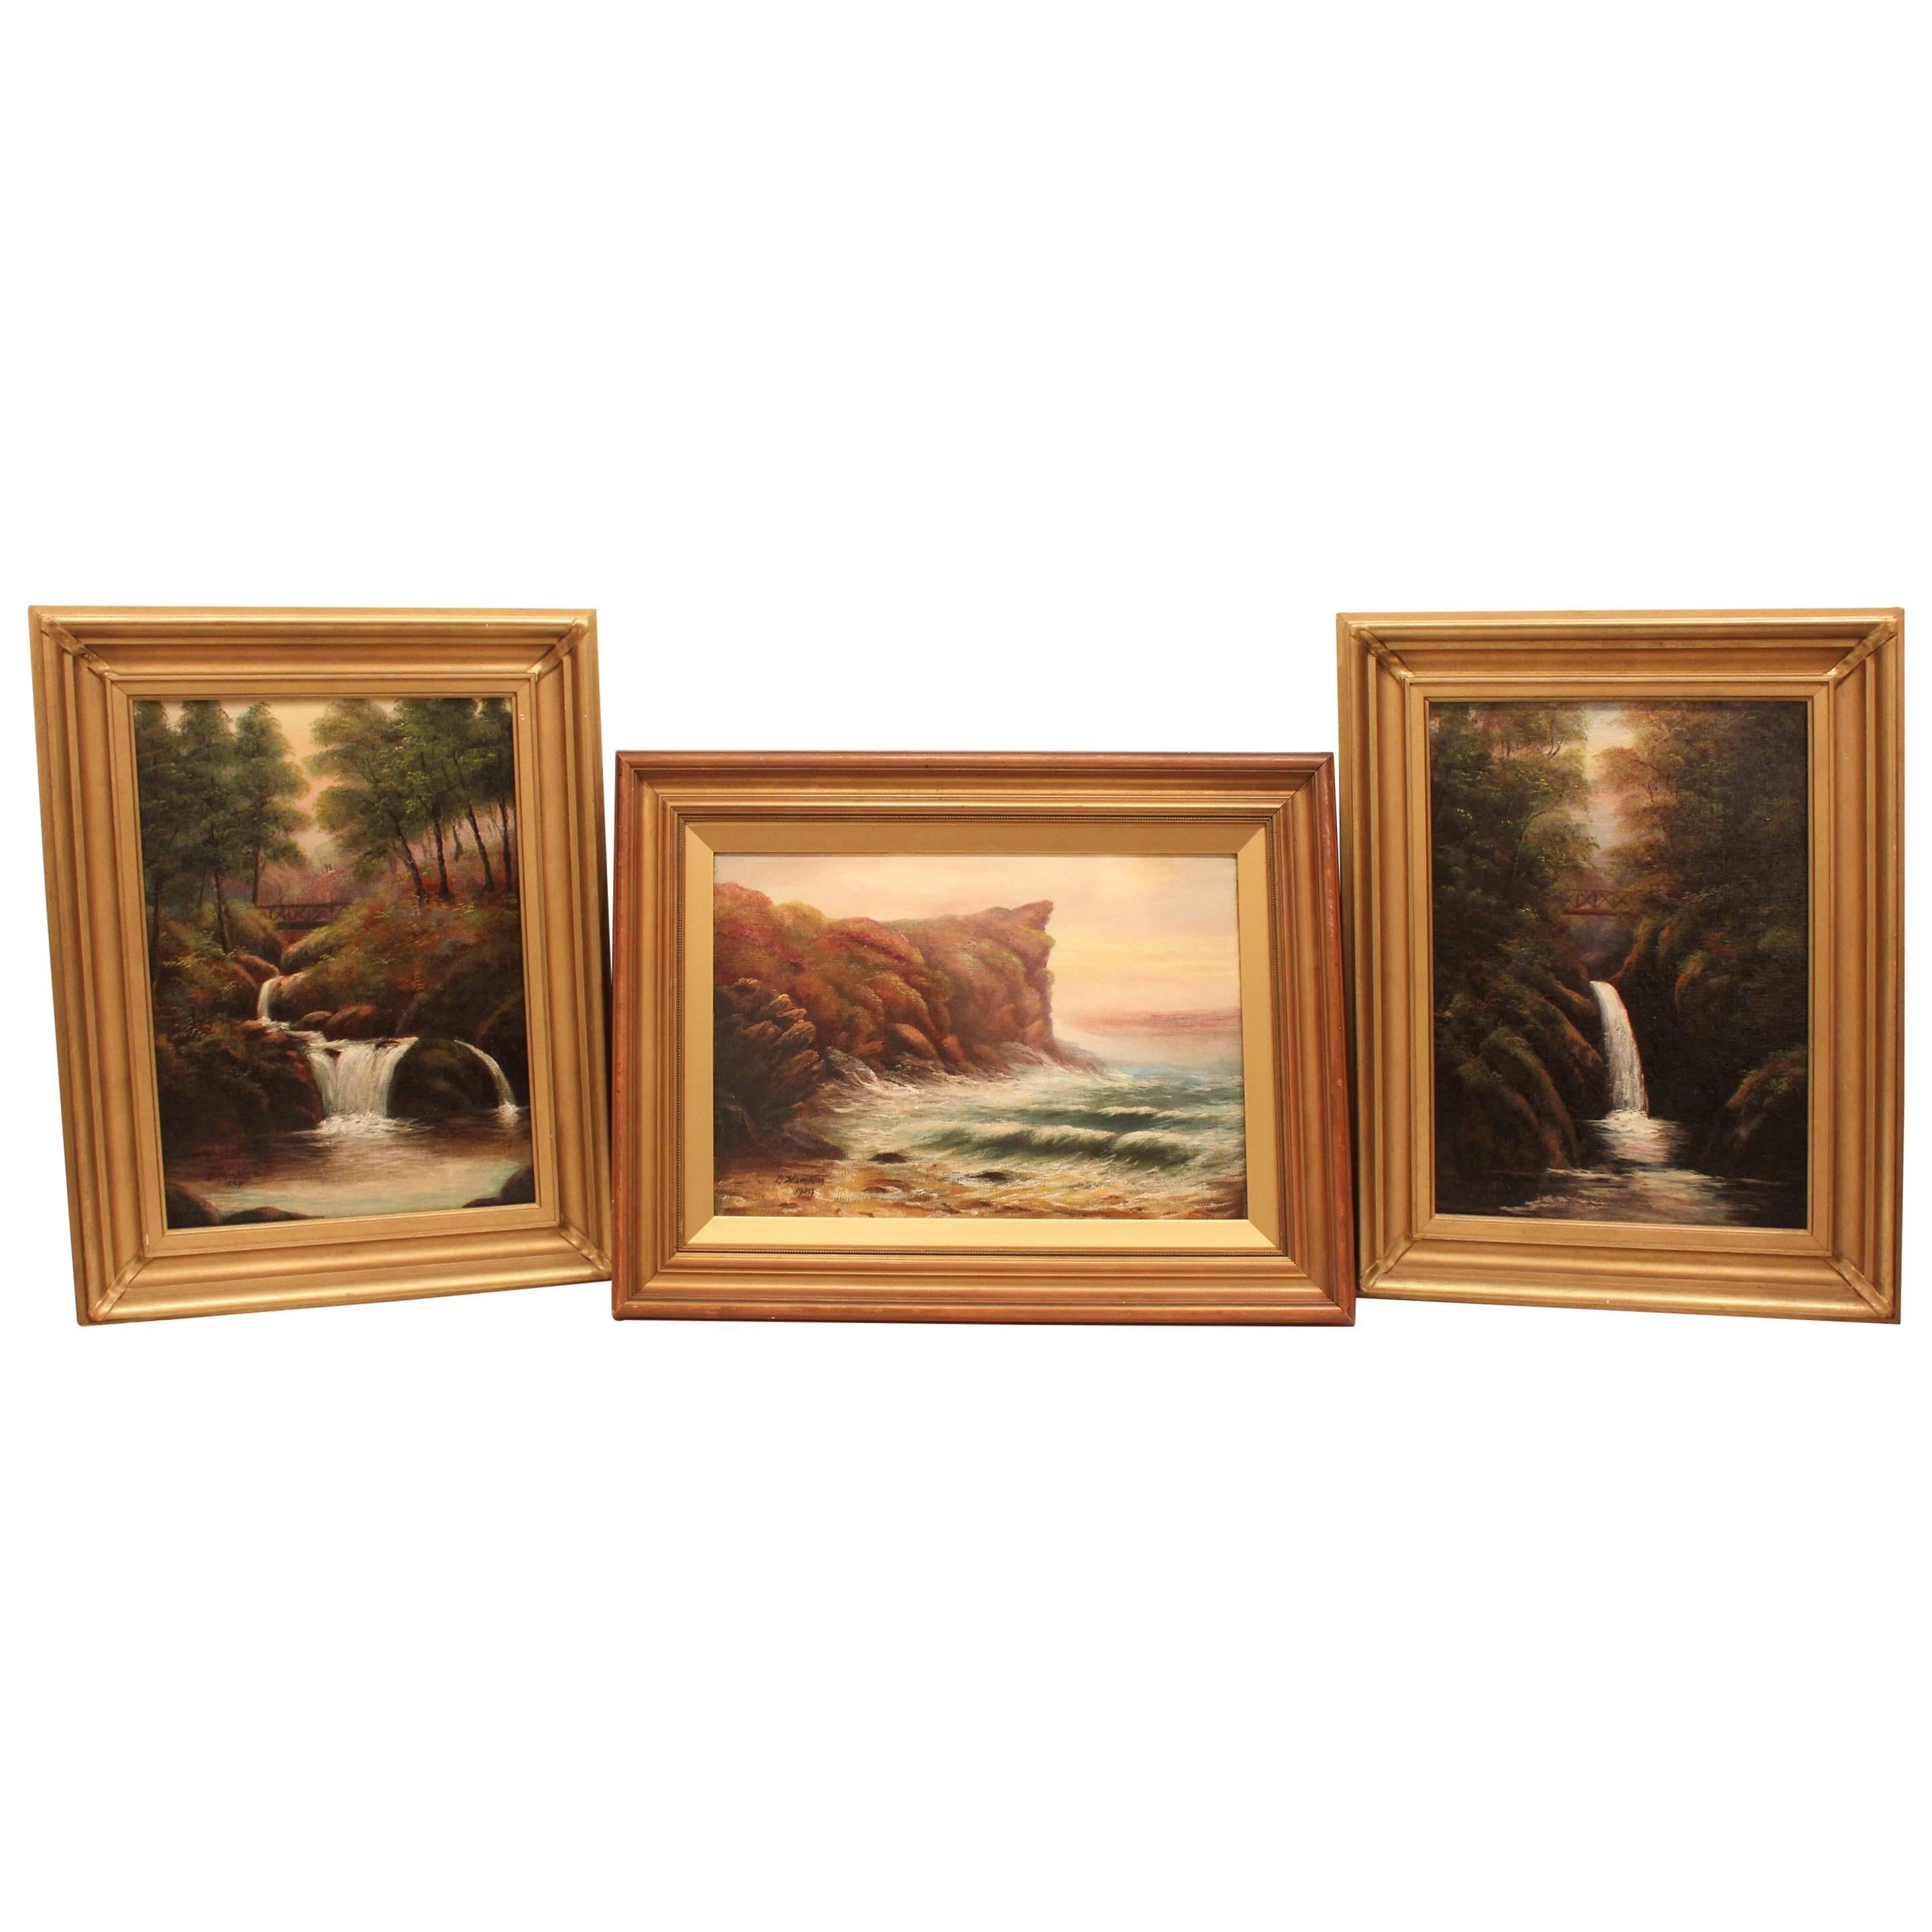 Set of Three "Isle of Man Views" Oil Paintings by D. Hampton For Sale